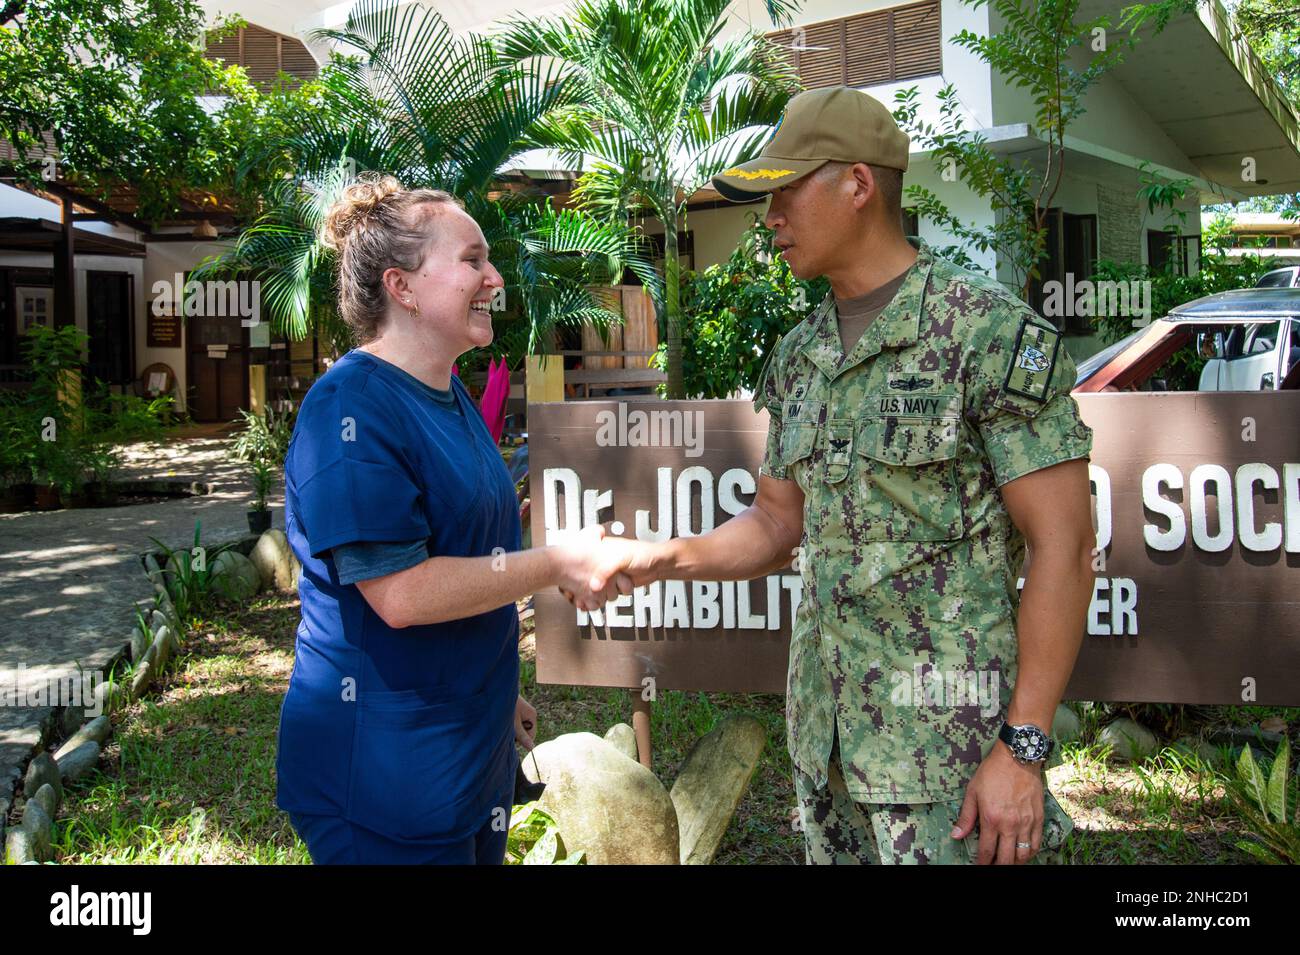 PUERTO PRINCESA, Philippines (July 28, 2022) — Capt. Hank Kim, Pacific Partnership 2022 (PP22) mission commander, right, presents a coin to Sarah Toone, an American Red Cross volunteer serving with PP22, at the Dr. Jose Antonio Socrates Rehabilitation Center during PP22. Now in its 17th year, Pacific Partnership is the largest annual multinational humanitarian assistance and disaster relief preparedness mission conducted in the Indo-Pacific. Stock Photo